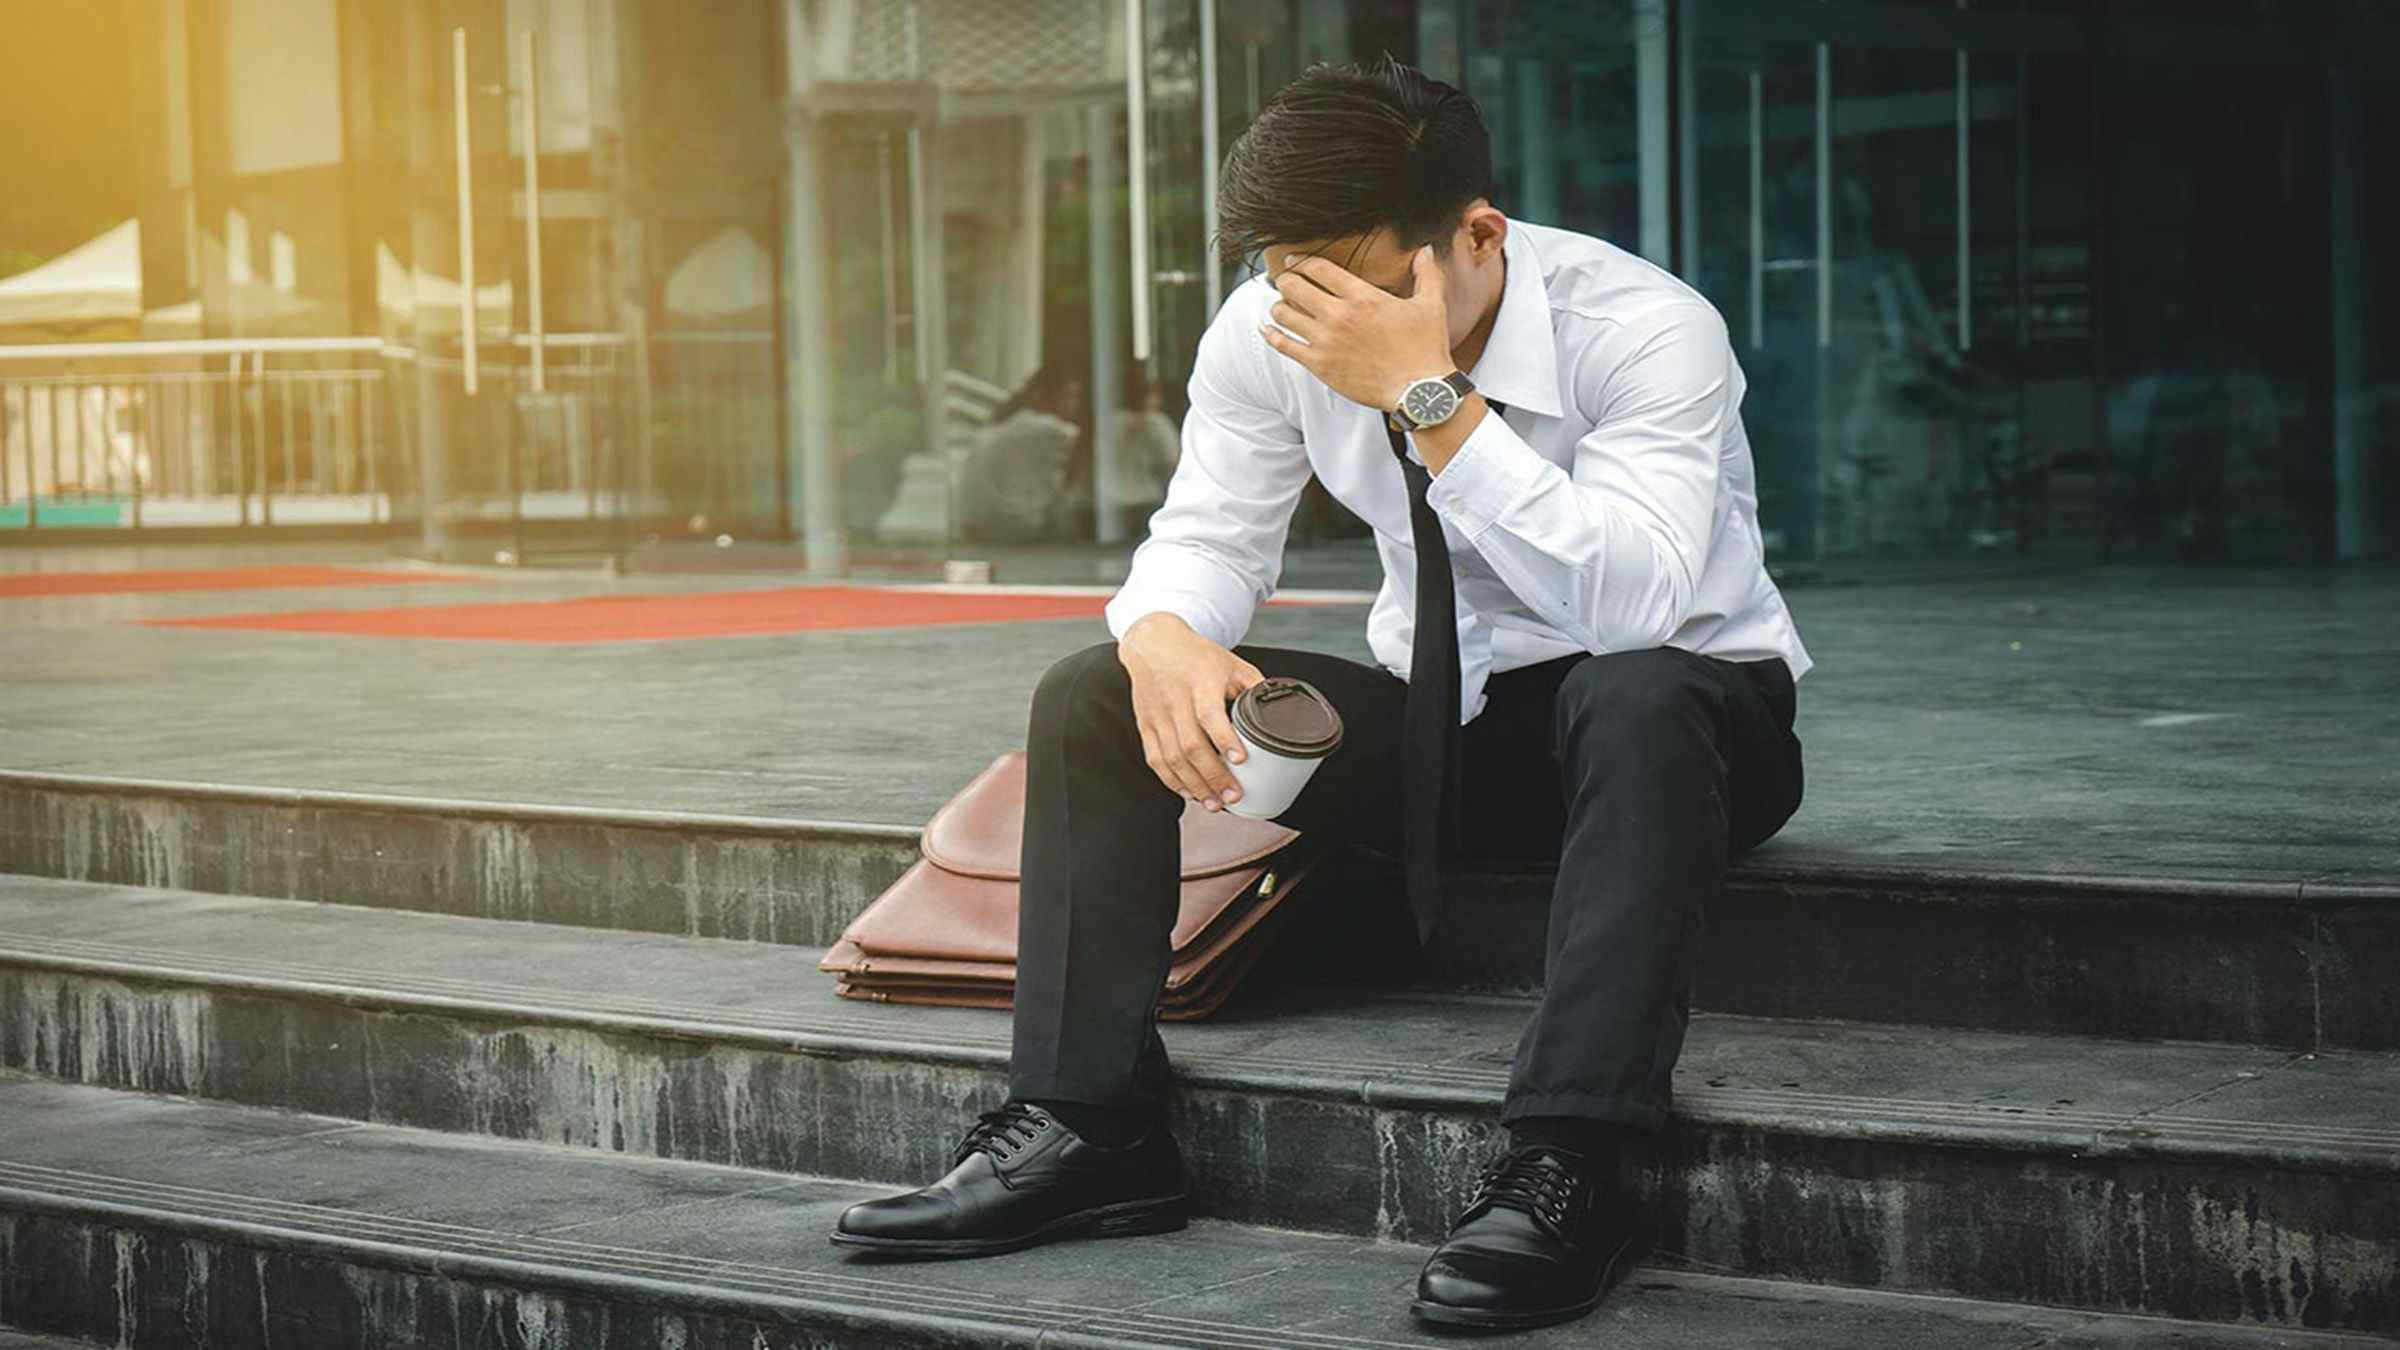 Unemployment impact on mental health how to cope